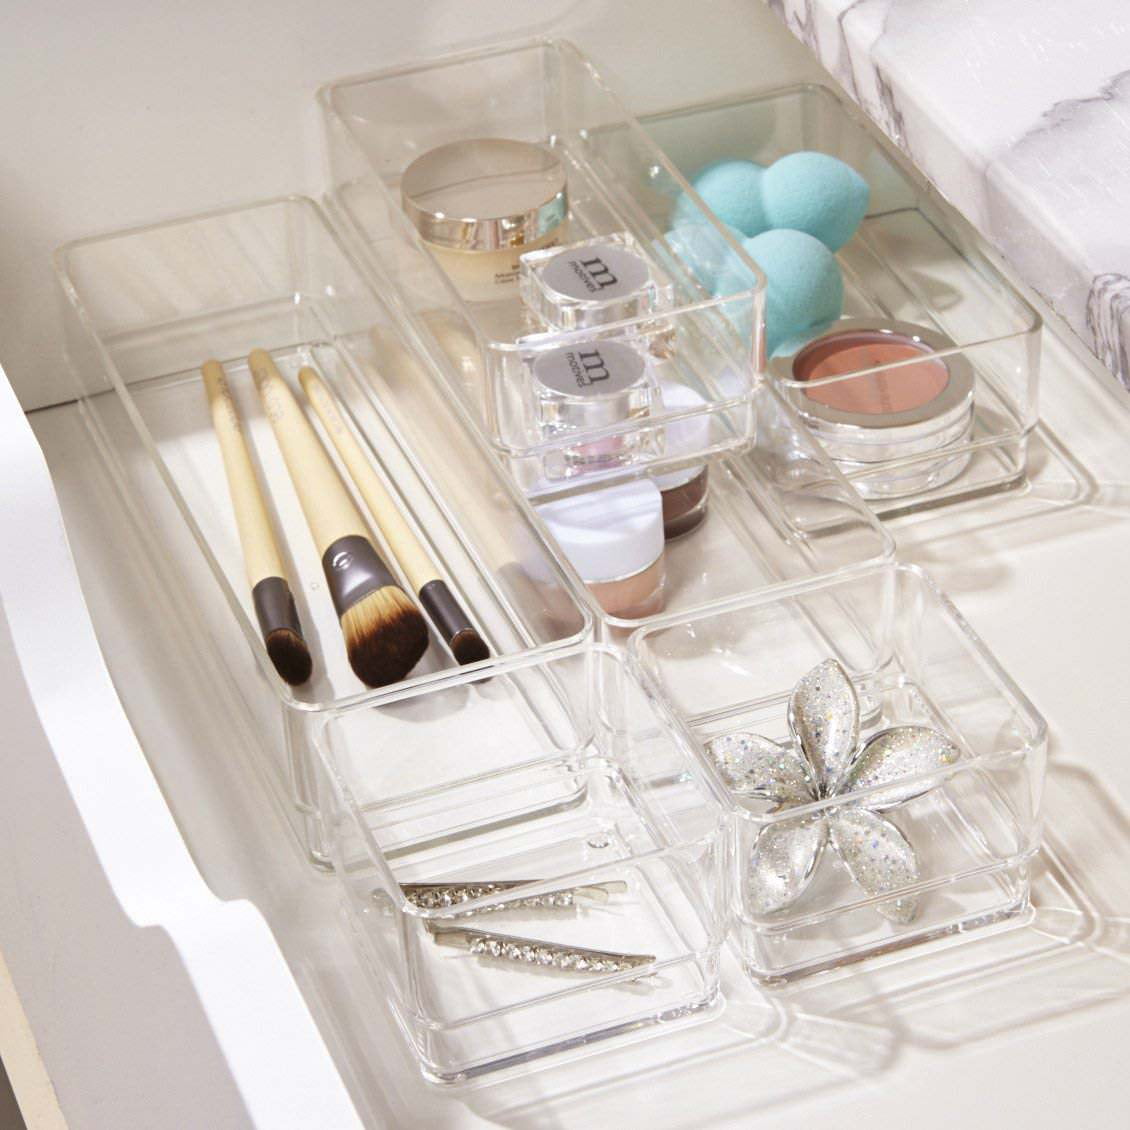 STORi Audrey Stackable Clear Bin Plastic Organizer Drawers, 2 Piece Set, Or